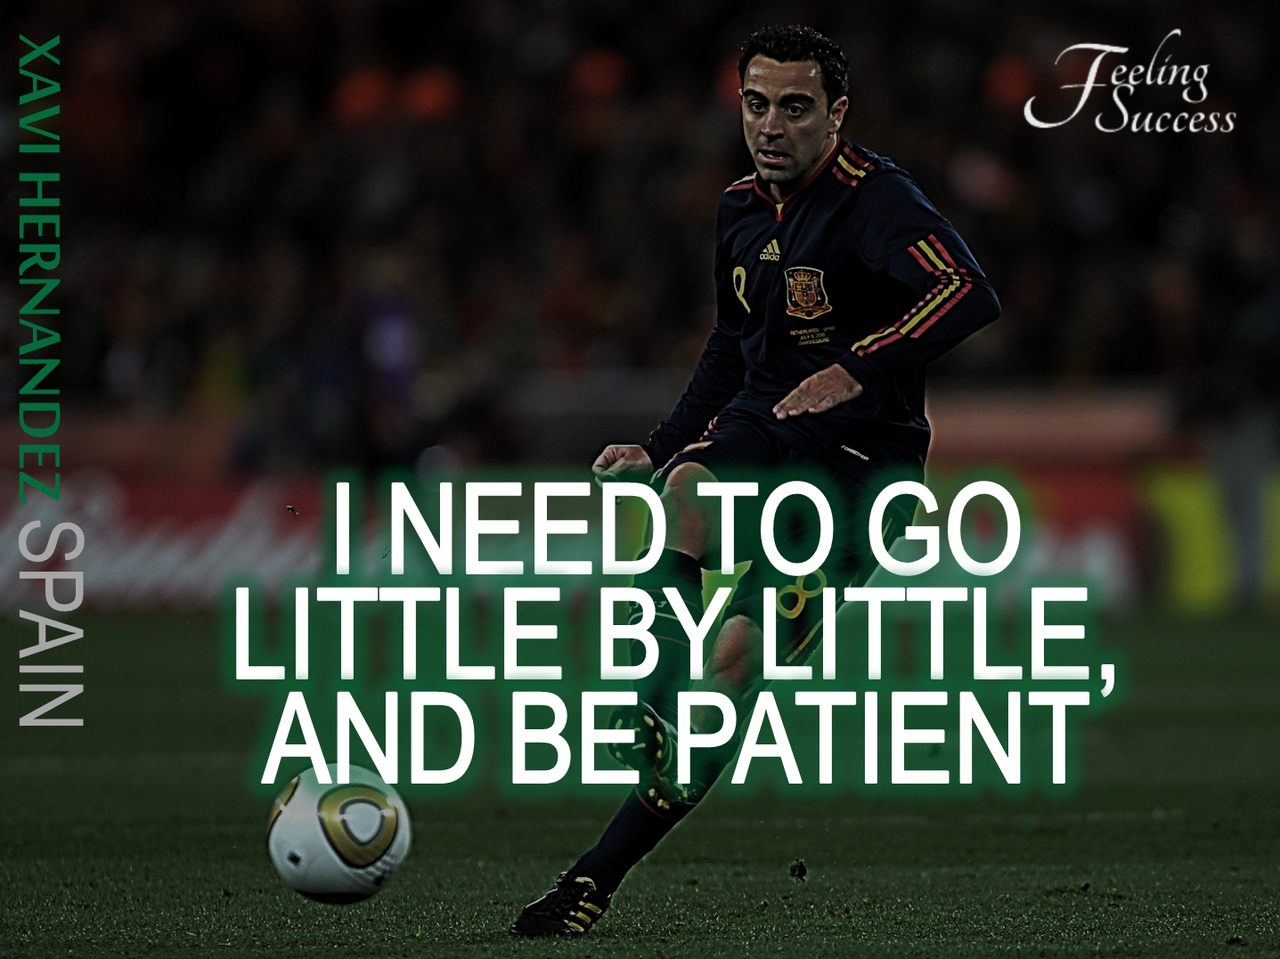 soccer quotes wallpaper,football player,player,football,soccer player,soccer